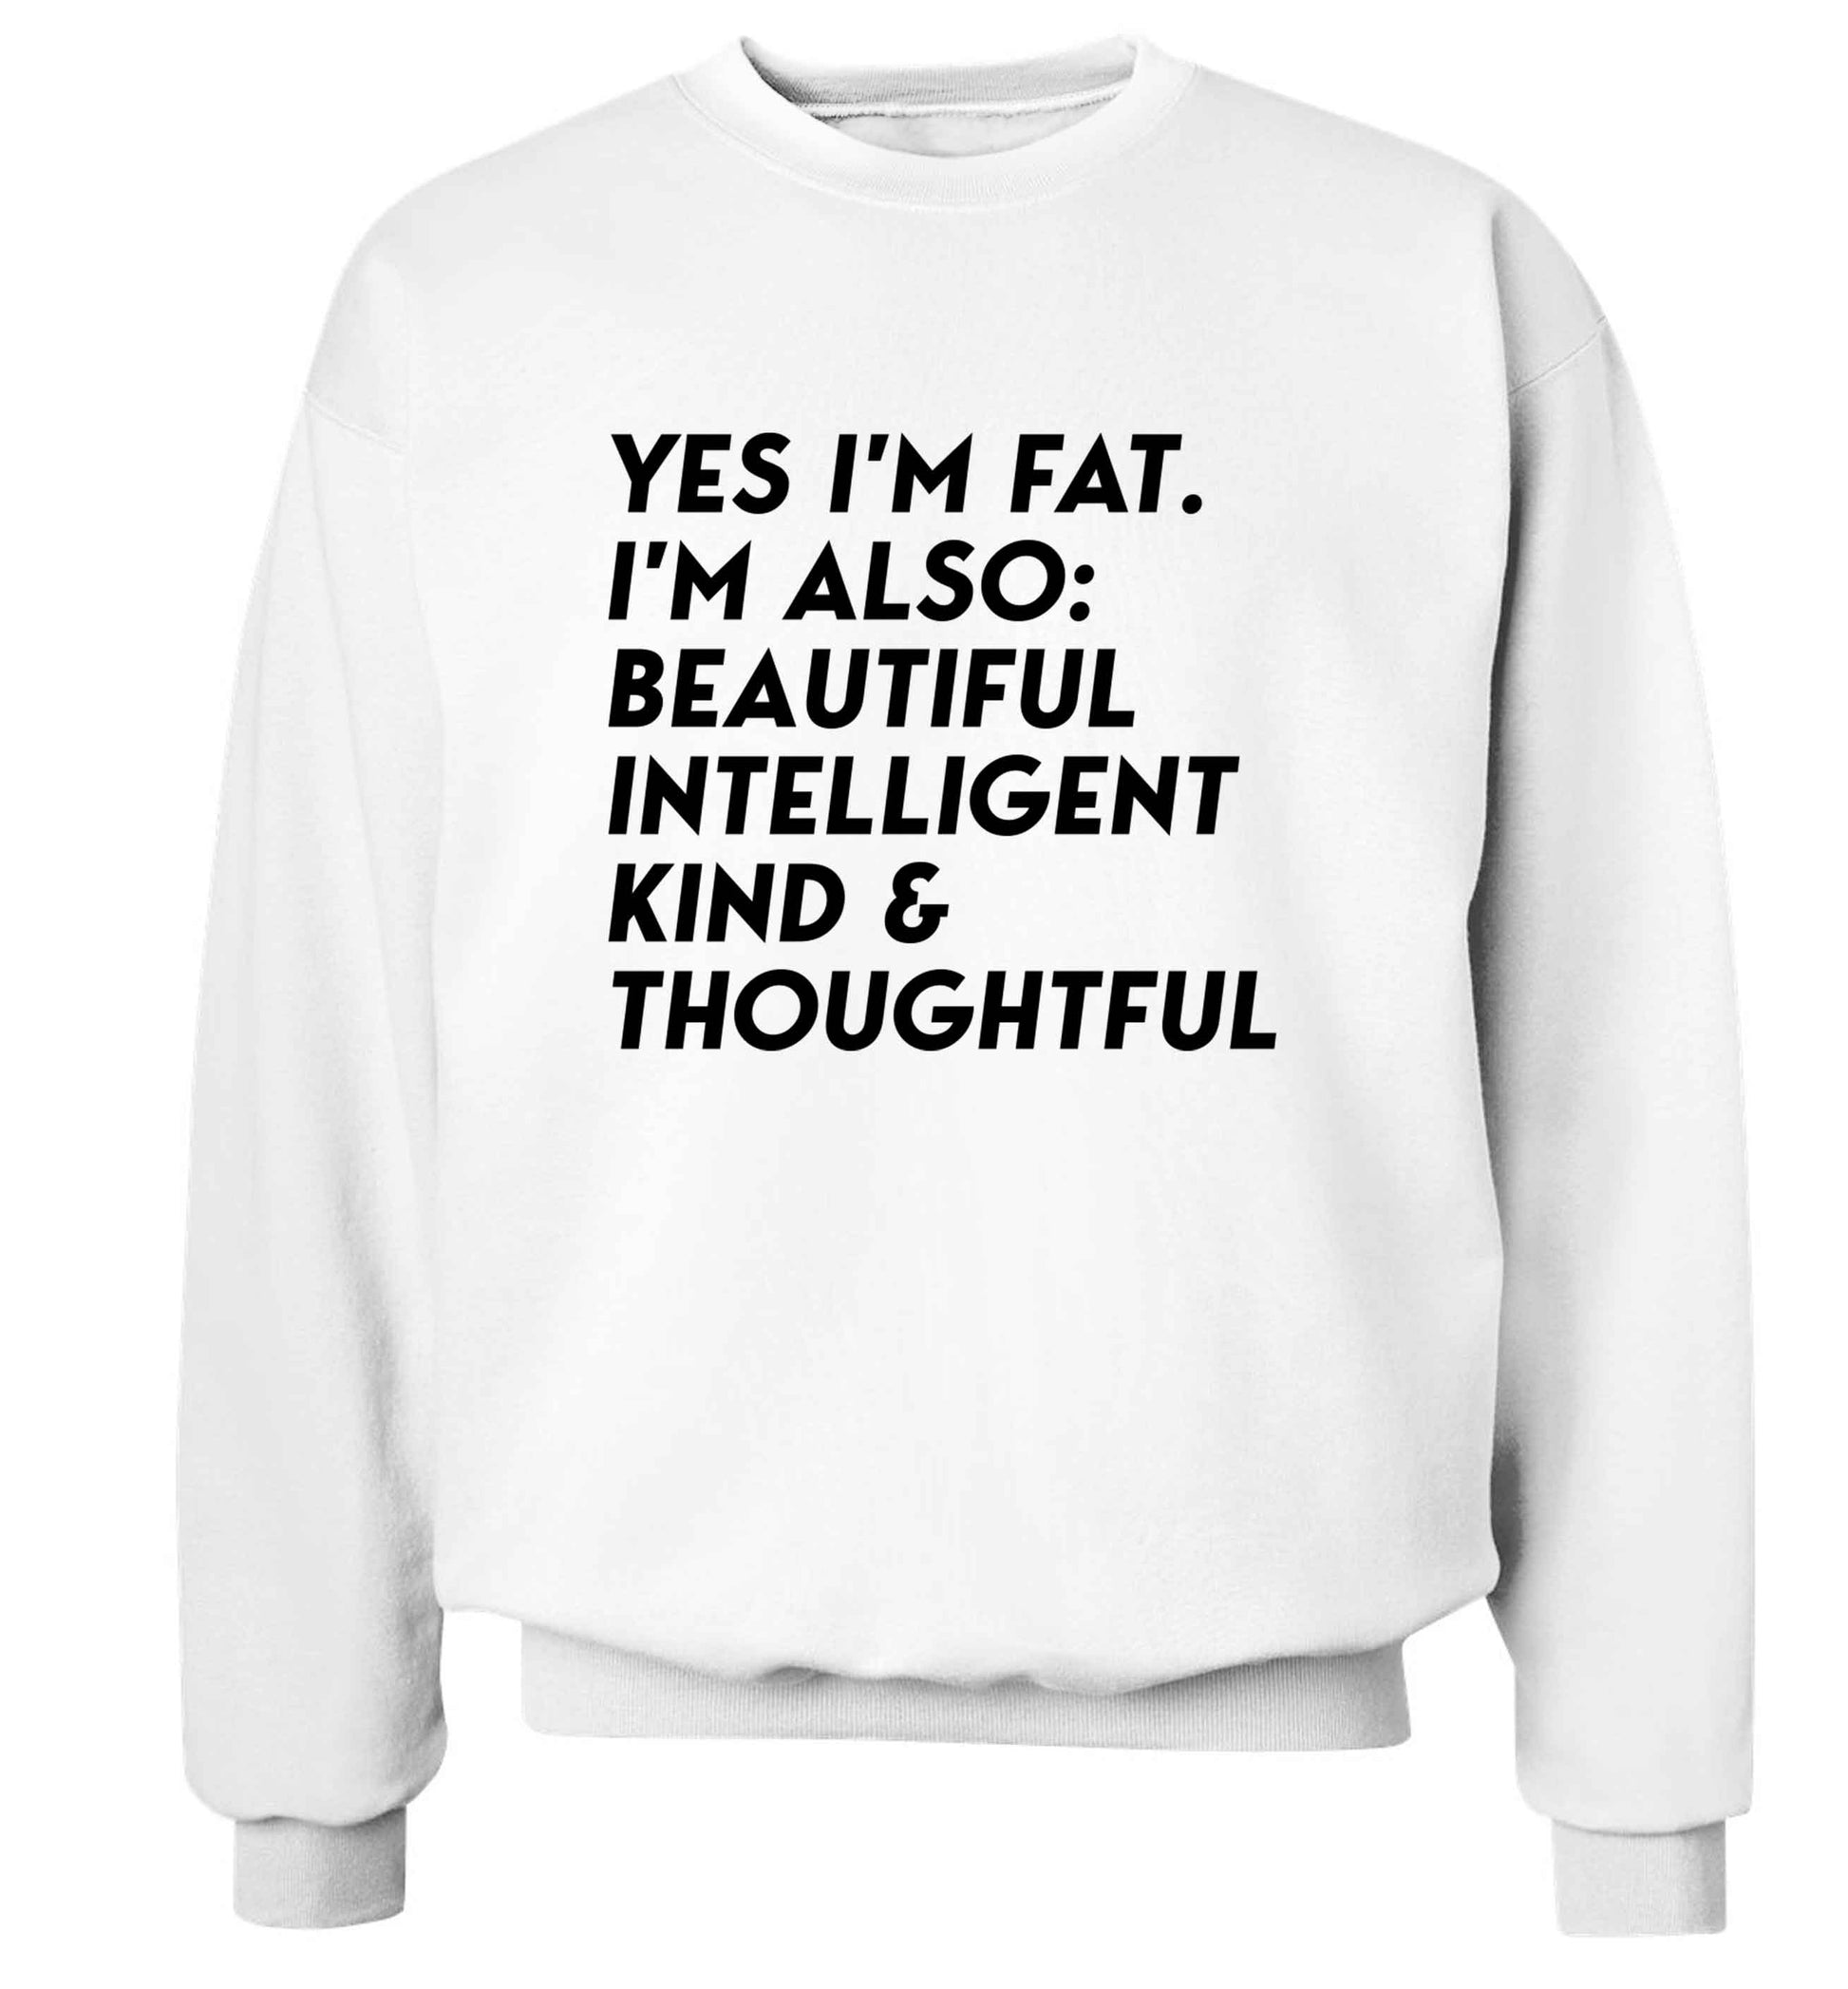 Yes I'm fat. I'm also: Beautiful intelligent kind and thoughtful adult's unisex white sweater 2XL